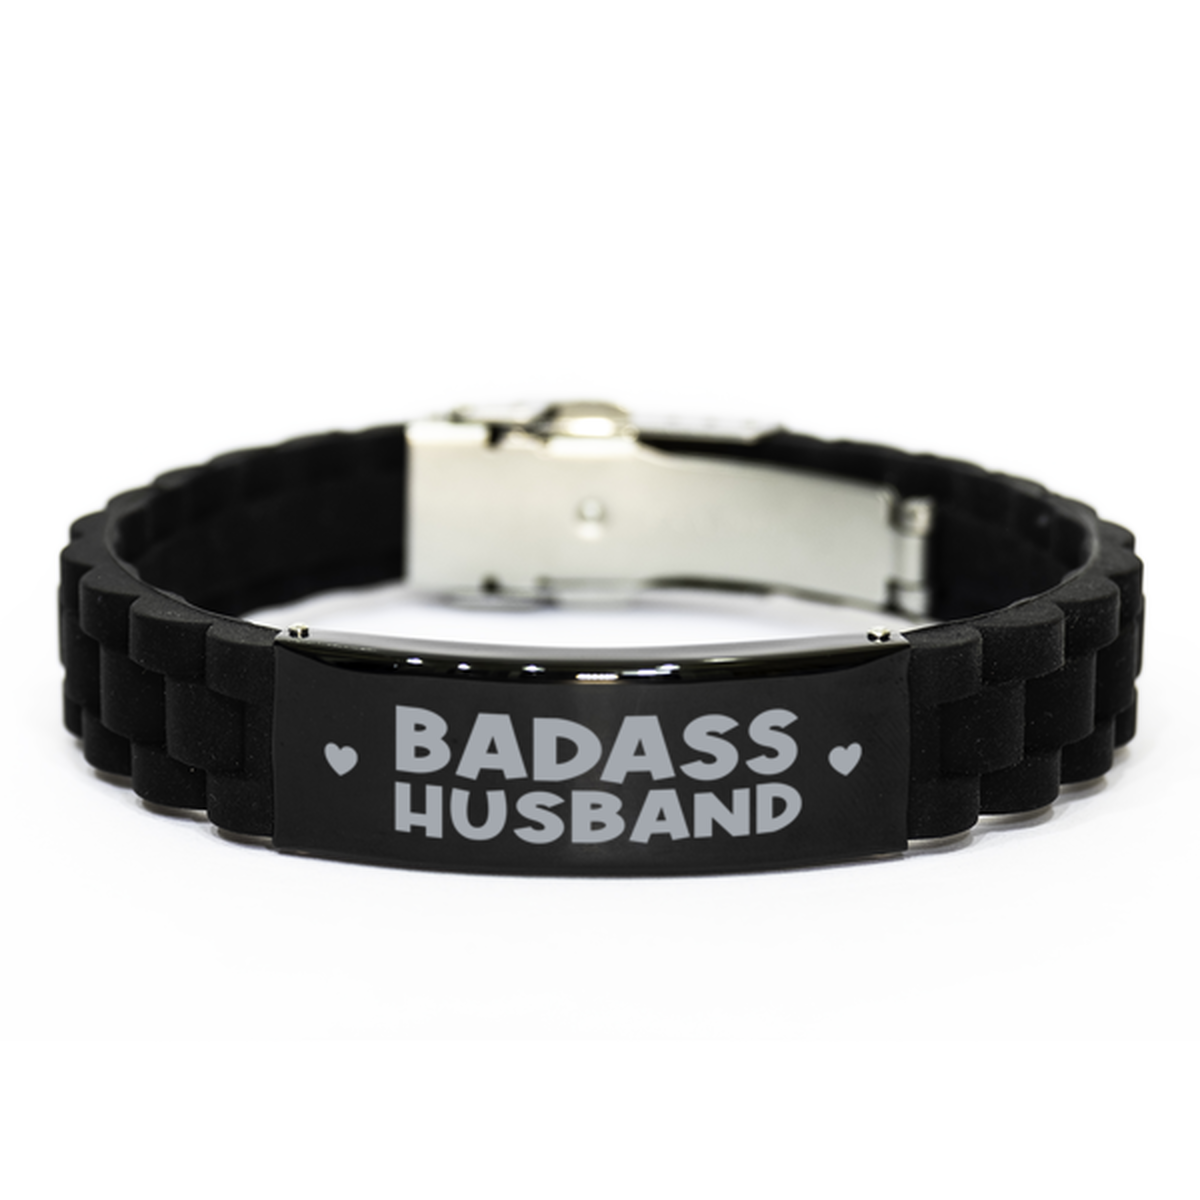 Husband Black Bracelet, Badass Husband, Funny Family Gifts For Husband From Wife